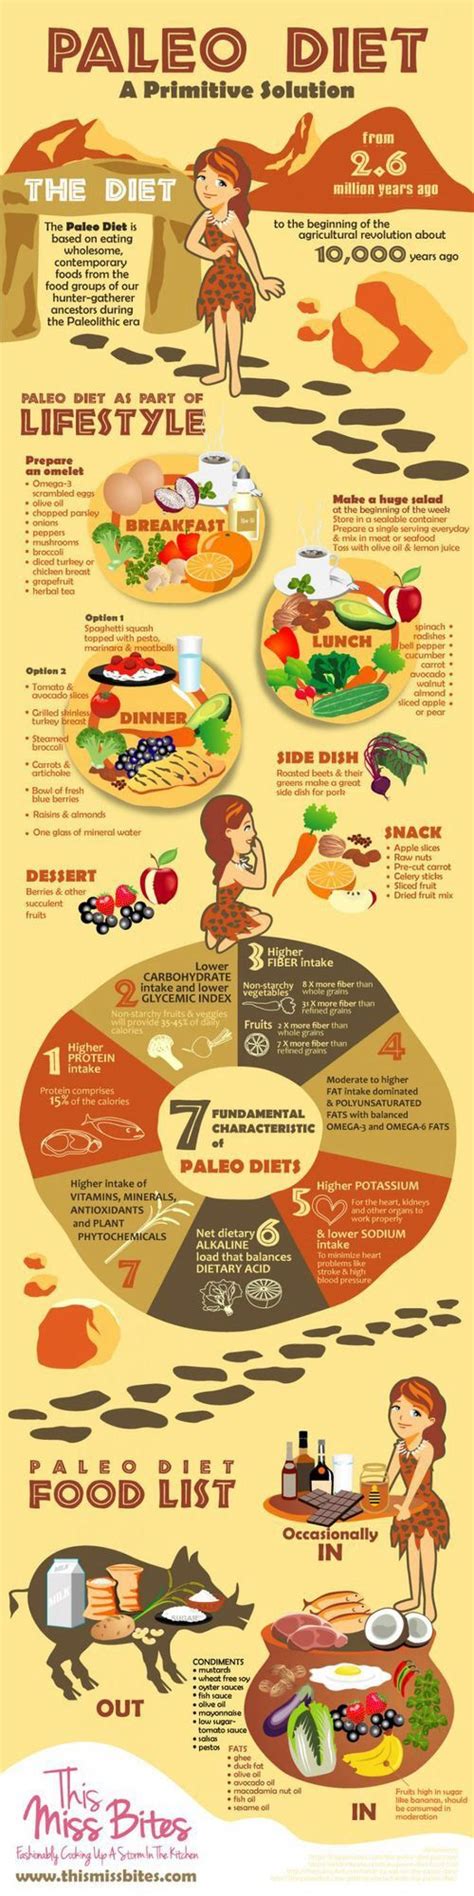 the ultimate guide to eating paleo [infographic] paleolithic diet paleo diet plan how to eat